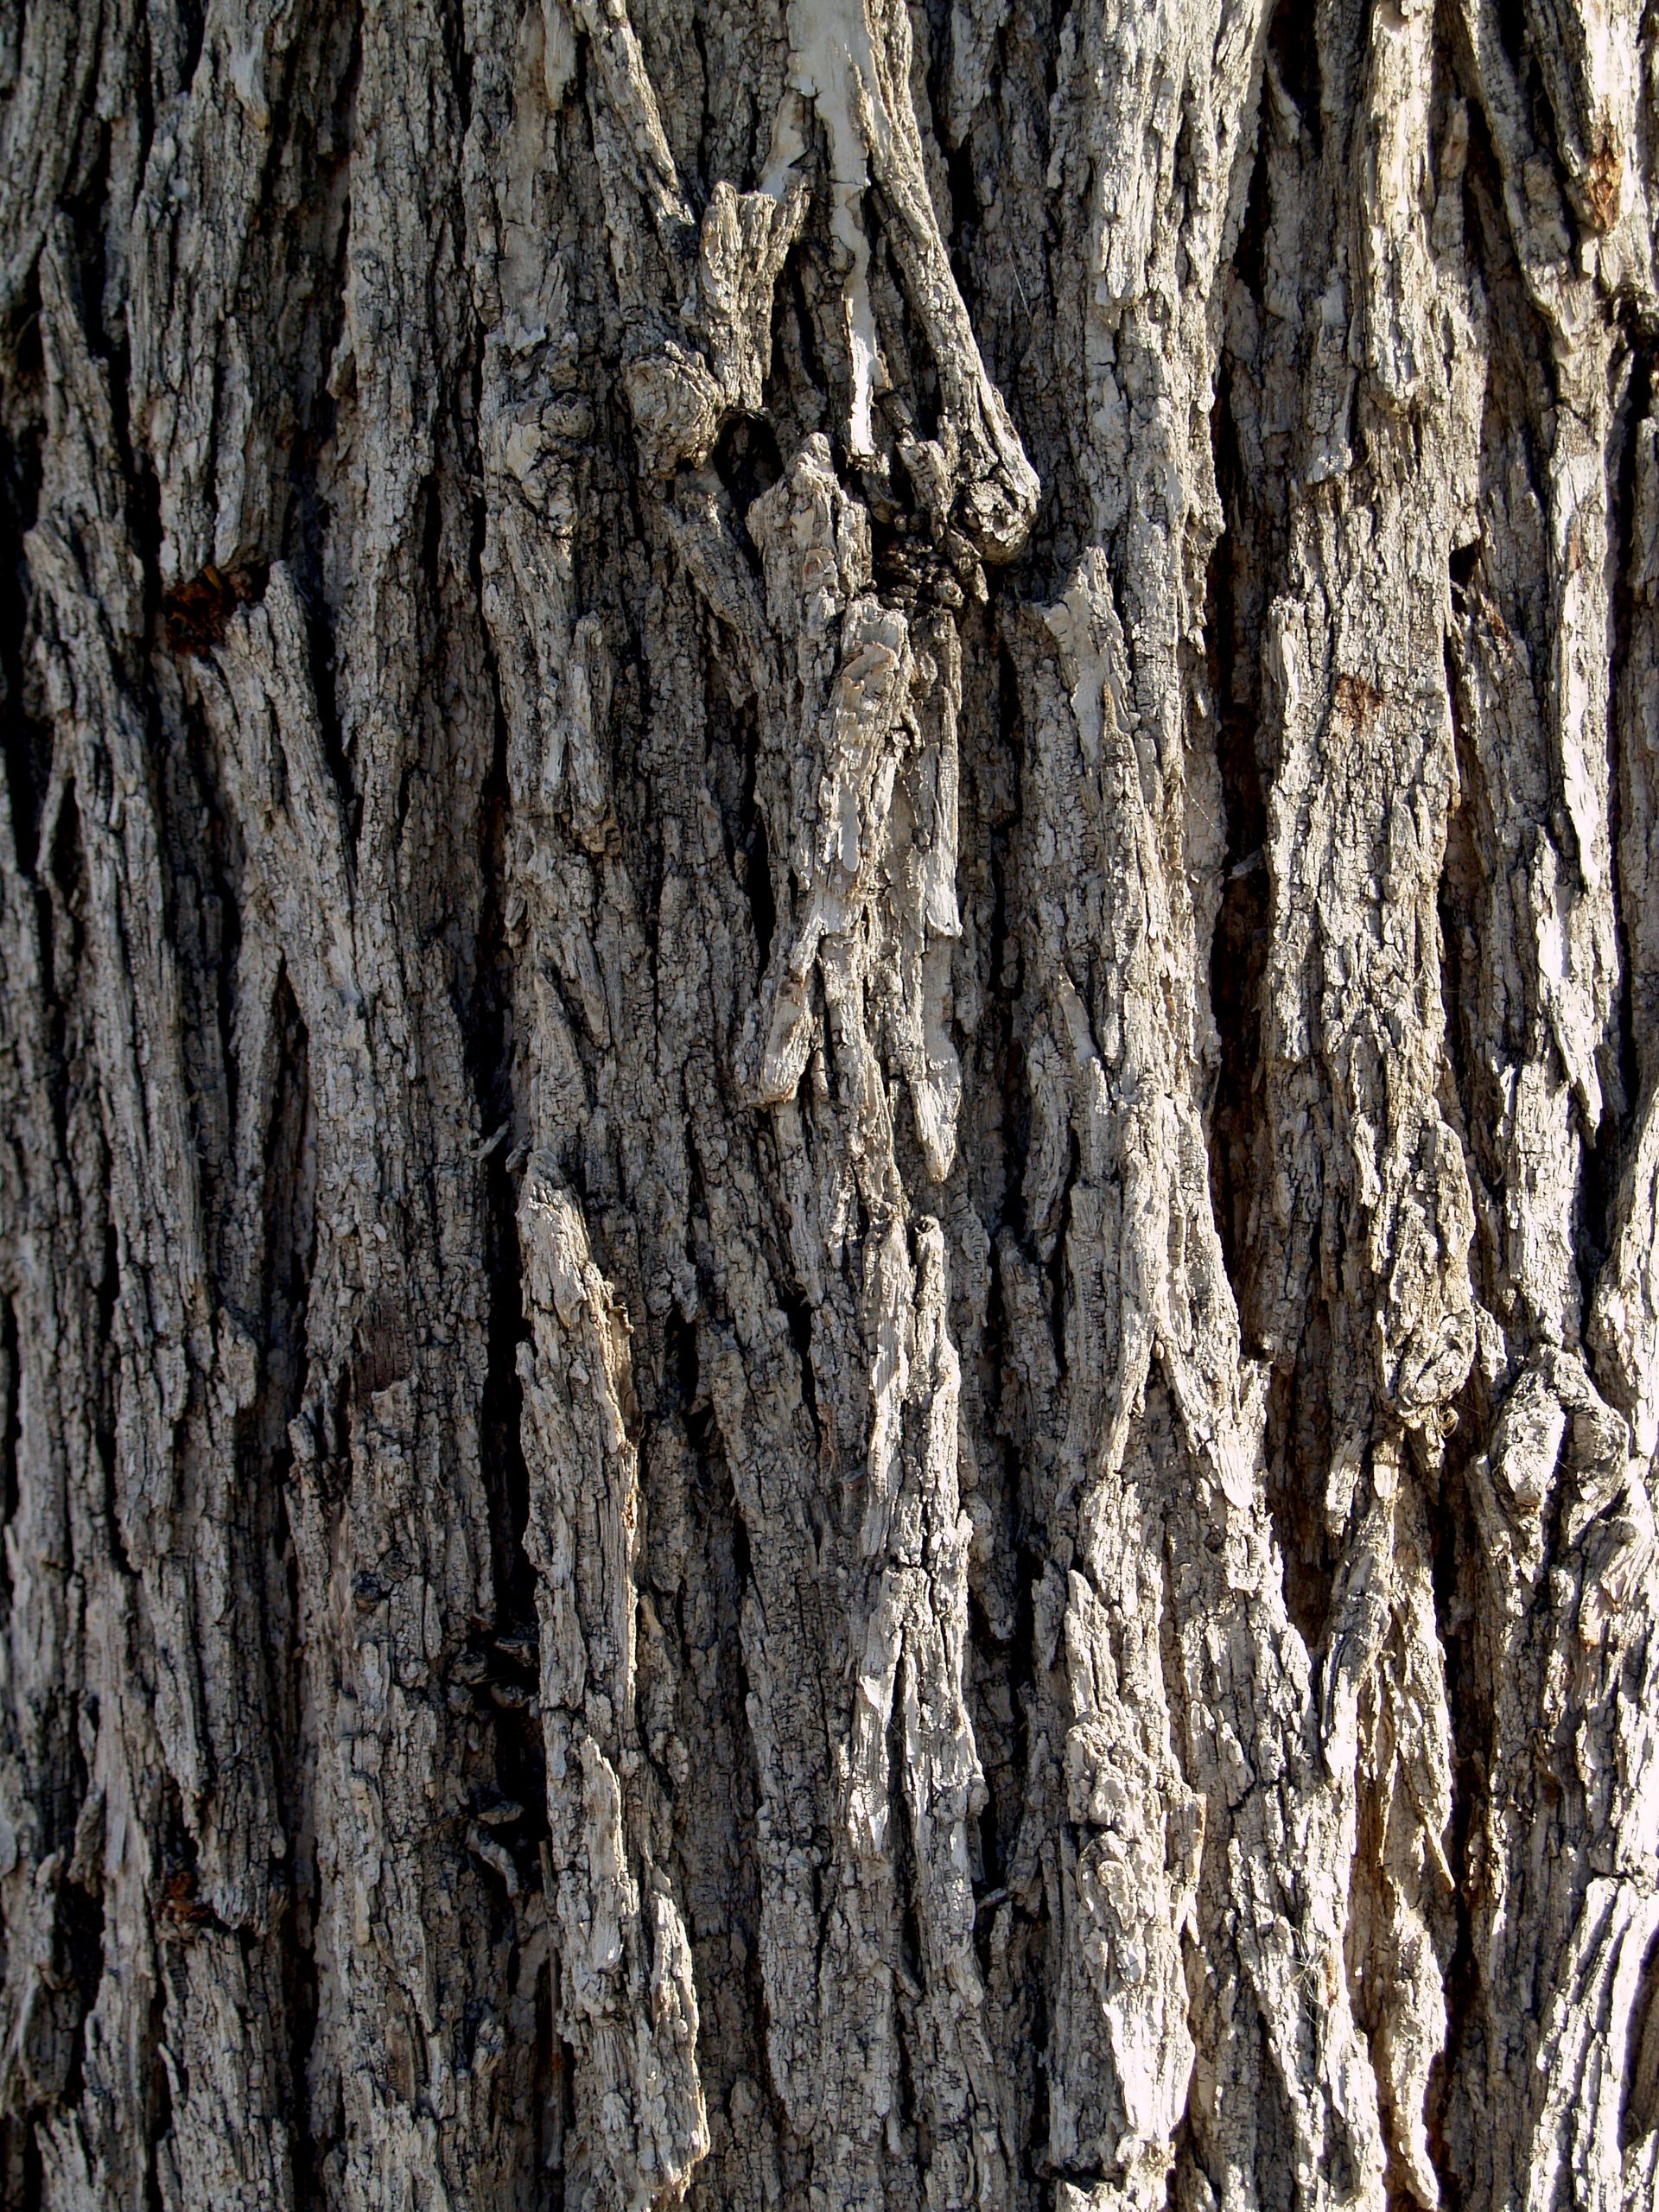 Close-up of the bark on a tree.